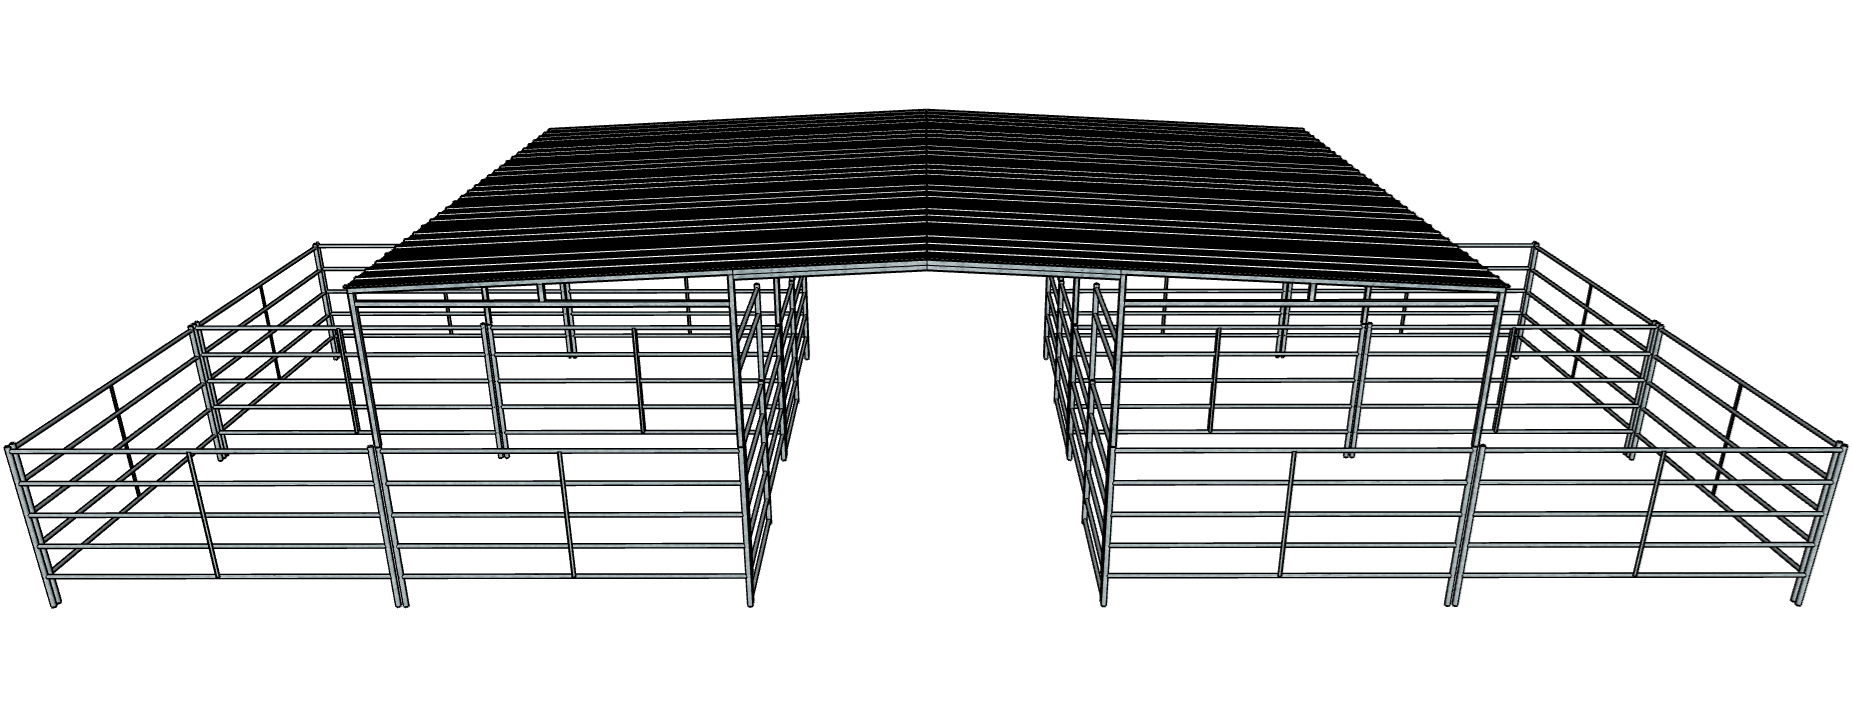 50 Ft X 20 Ft 5-Rail 4 Stall Barn Kit with 30 Ft by 20 Ft Gable Roof